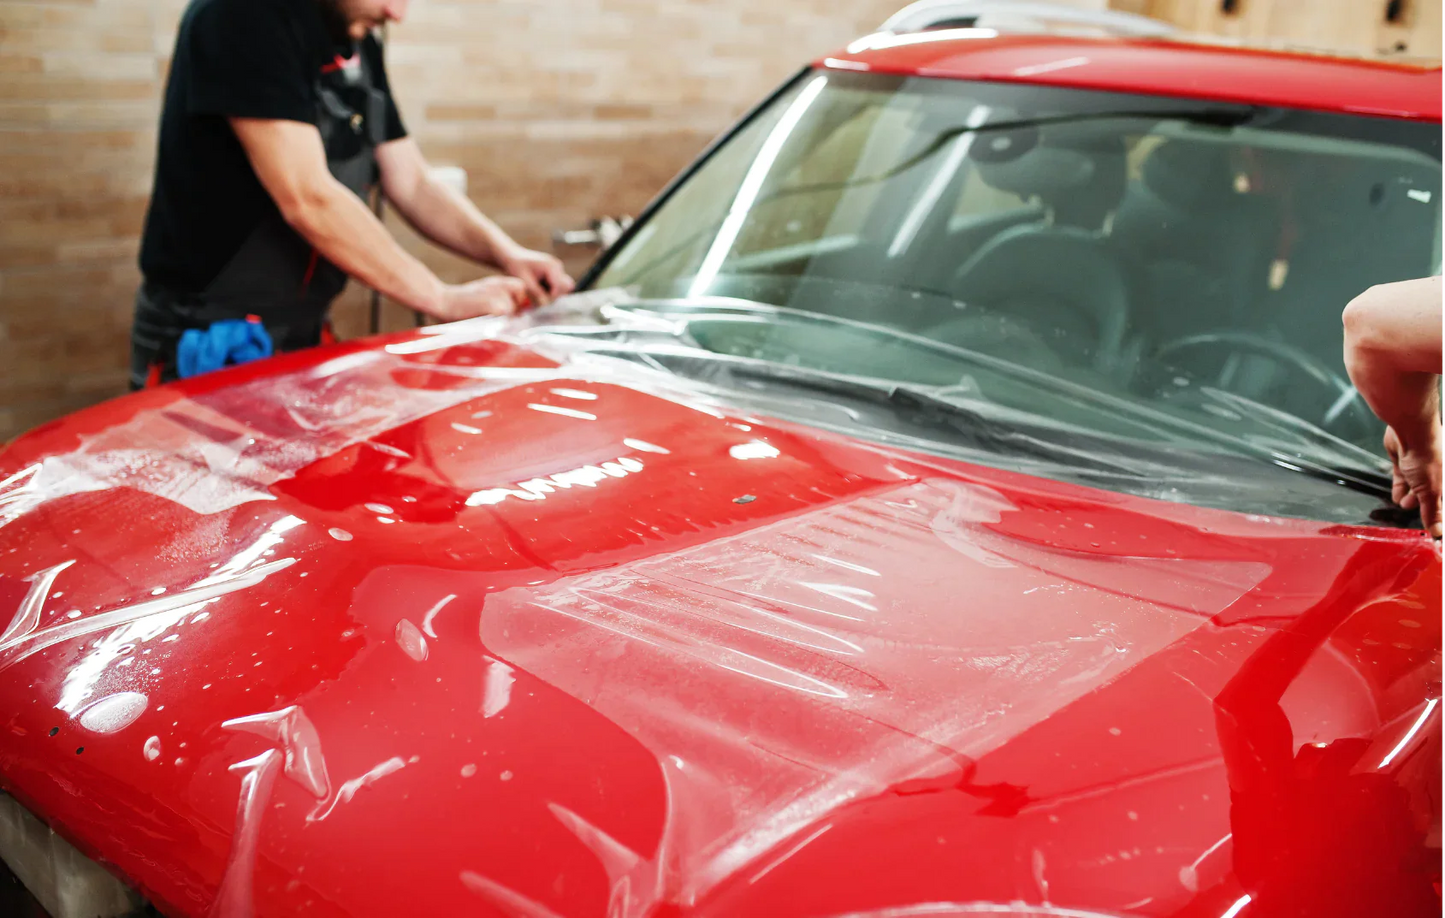 Ultra-Gloss Self Healing Paint Protection Film (12"W x 120"L up to 60"W x 588"L)